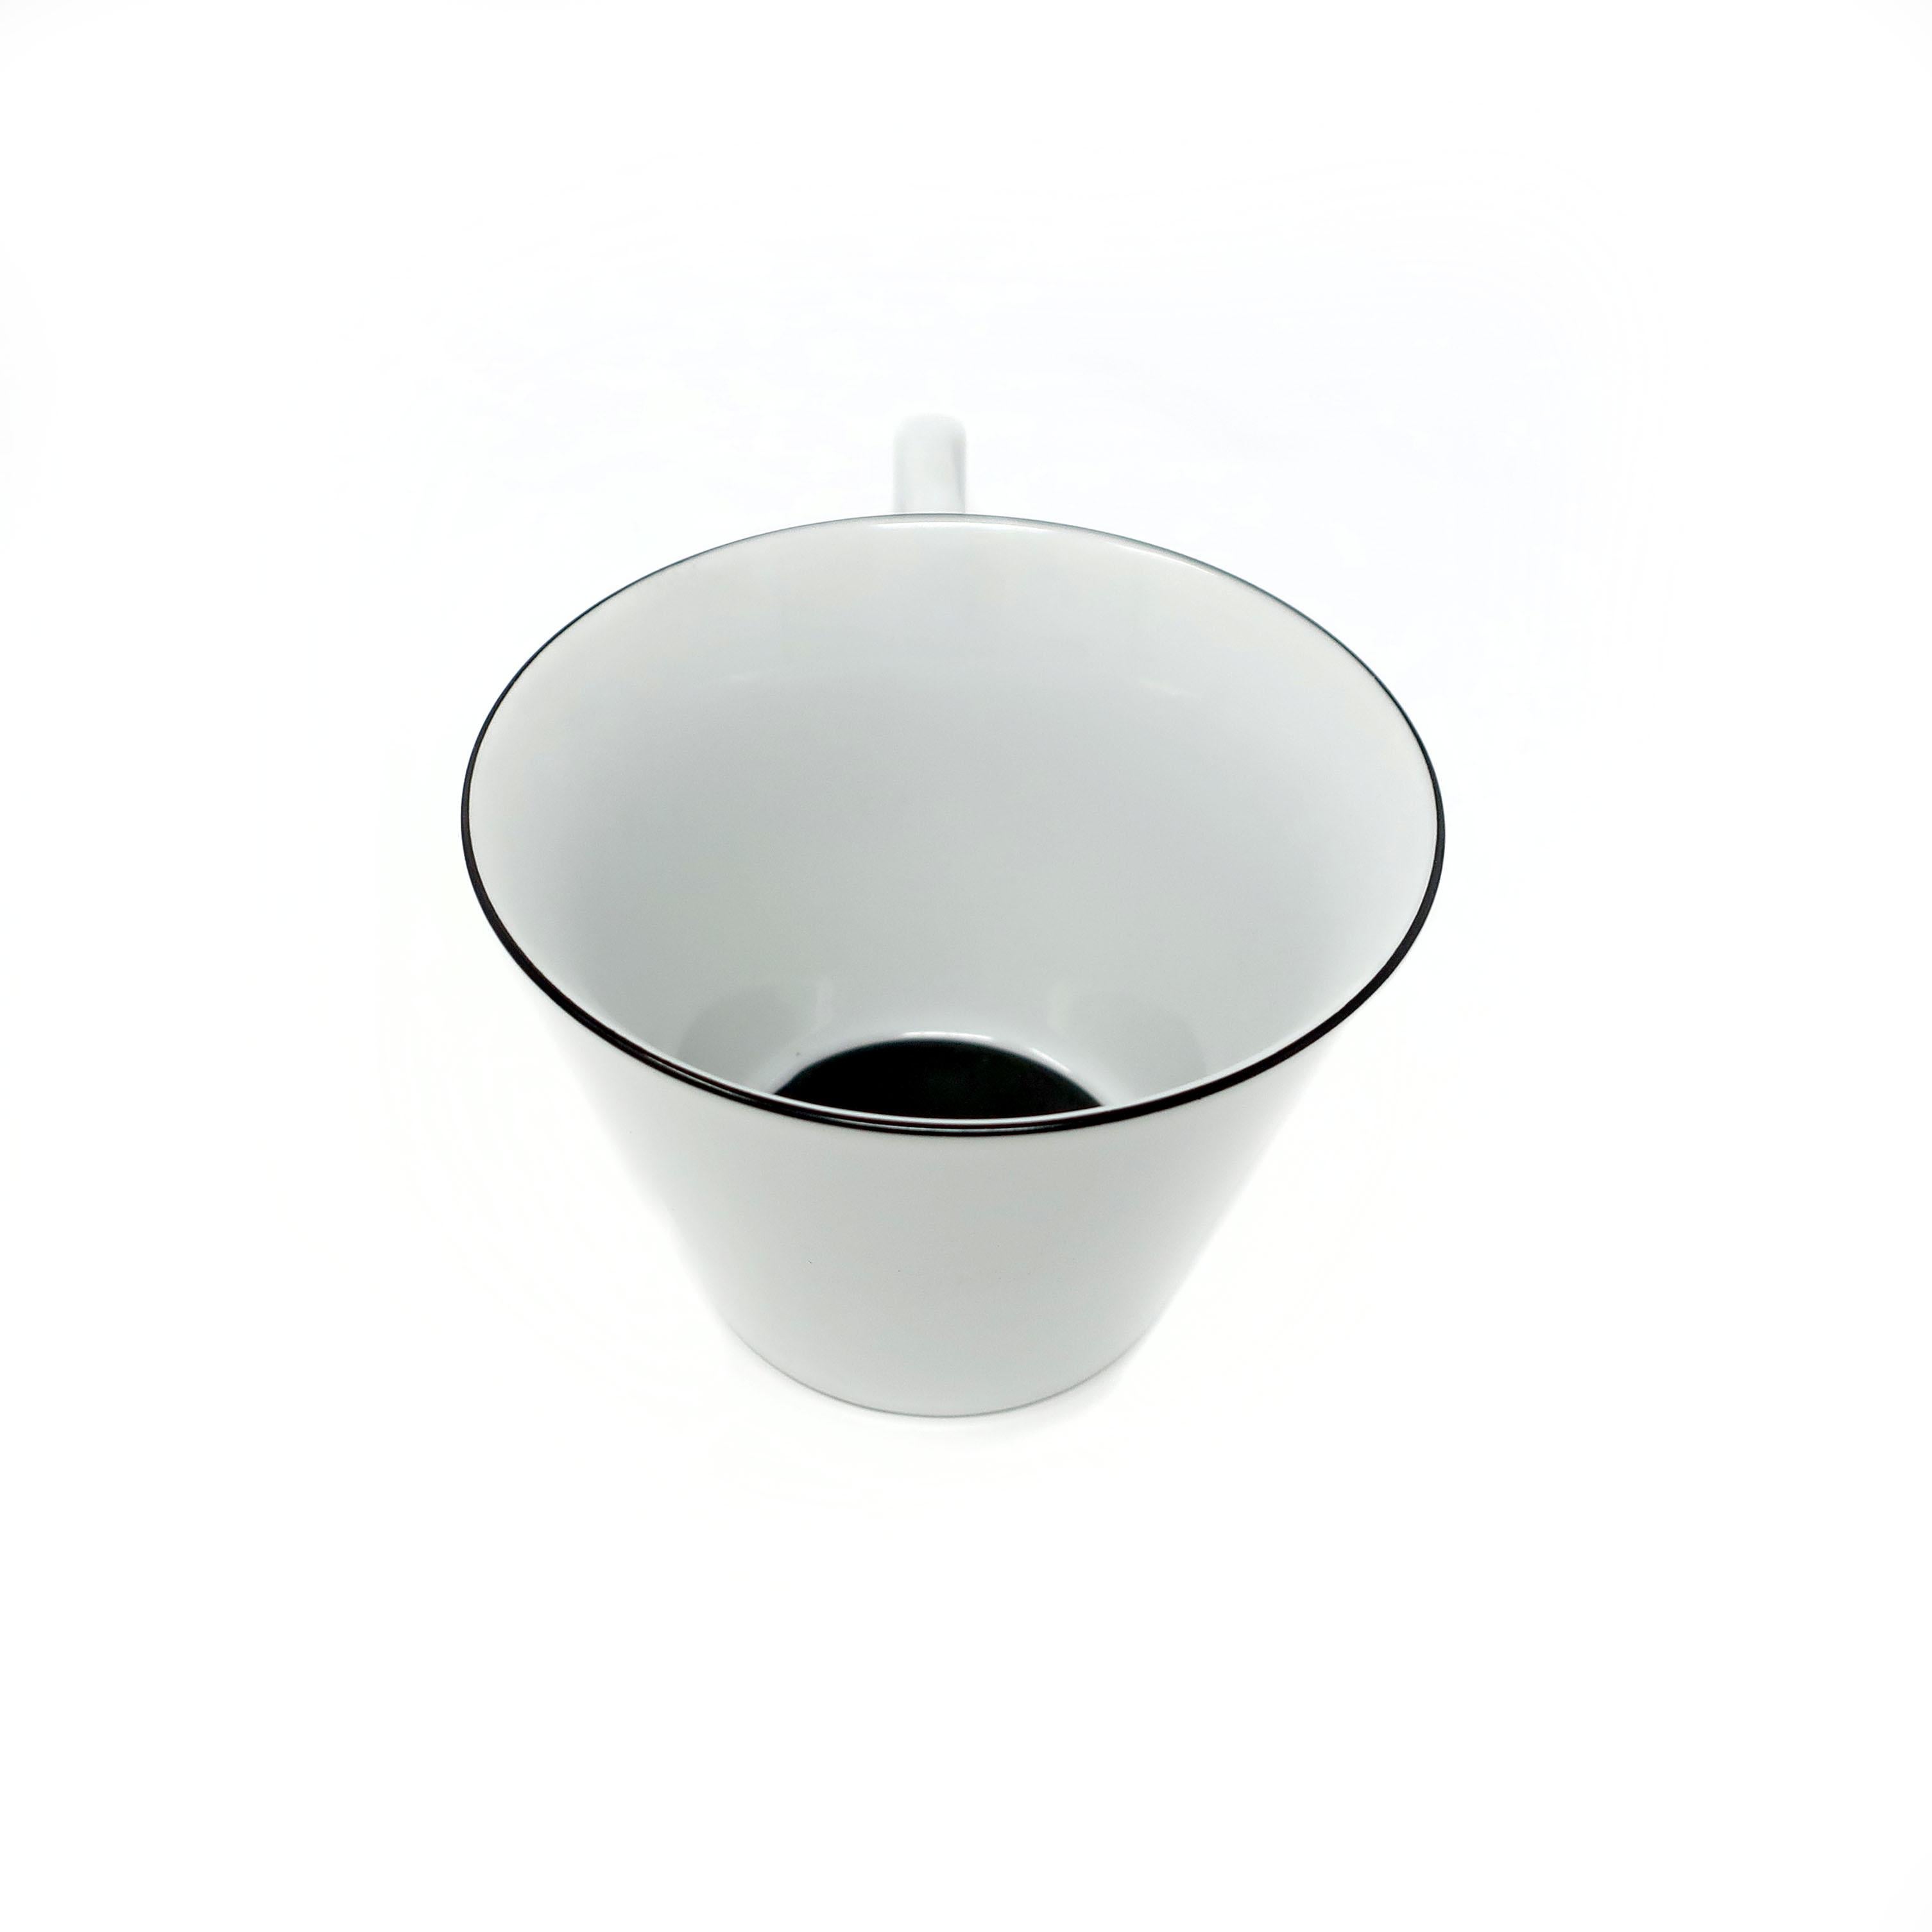 Andree Putman for Sasaki Cups and Saucers 1